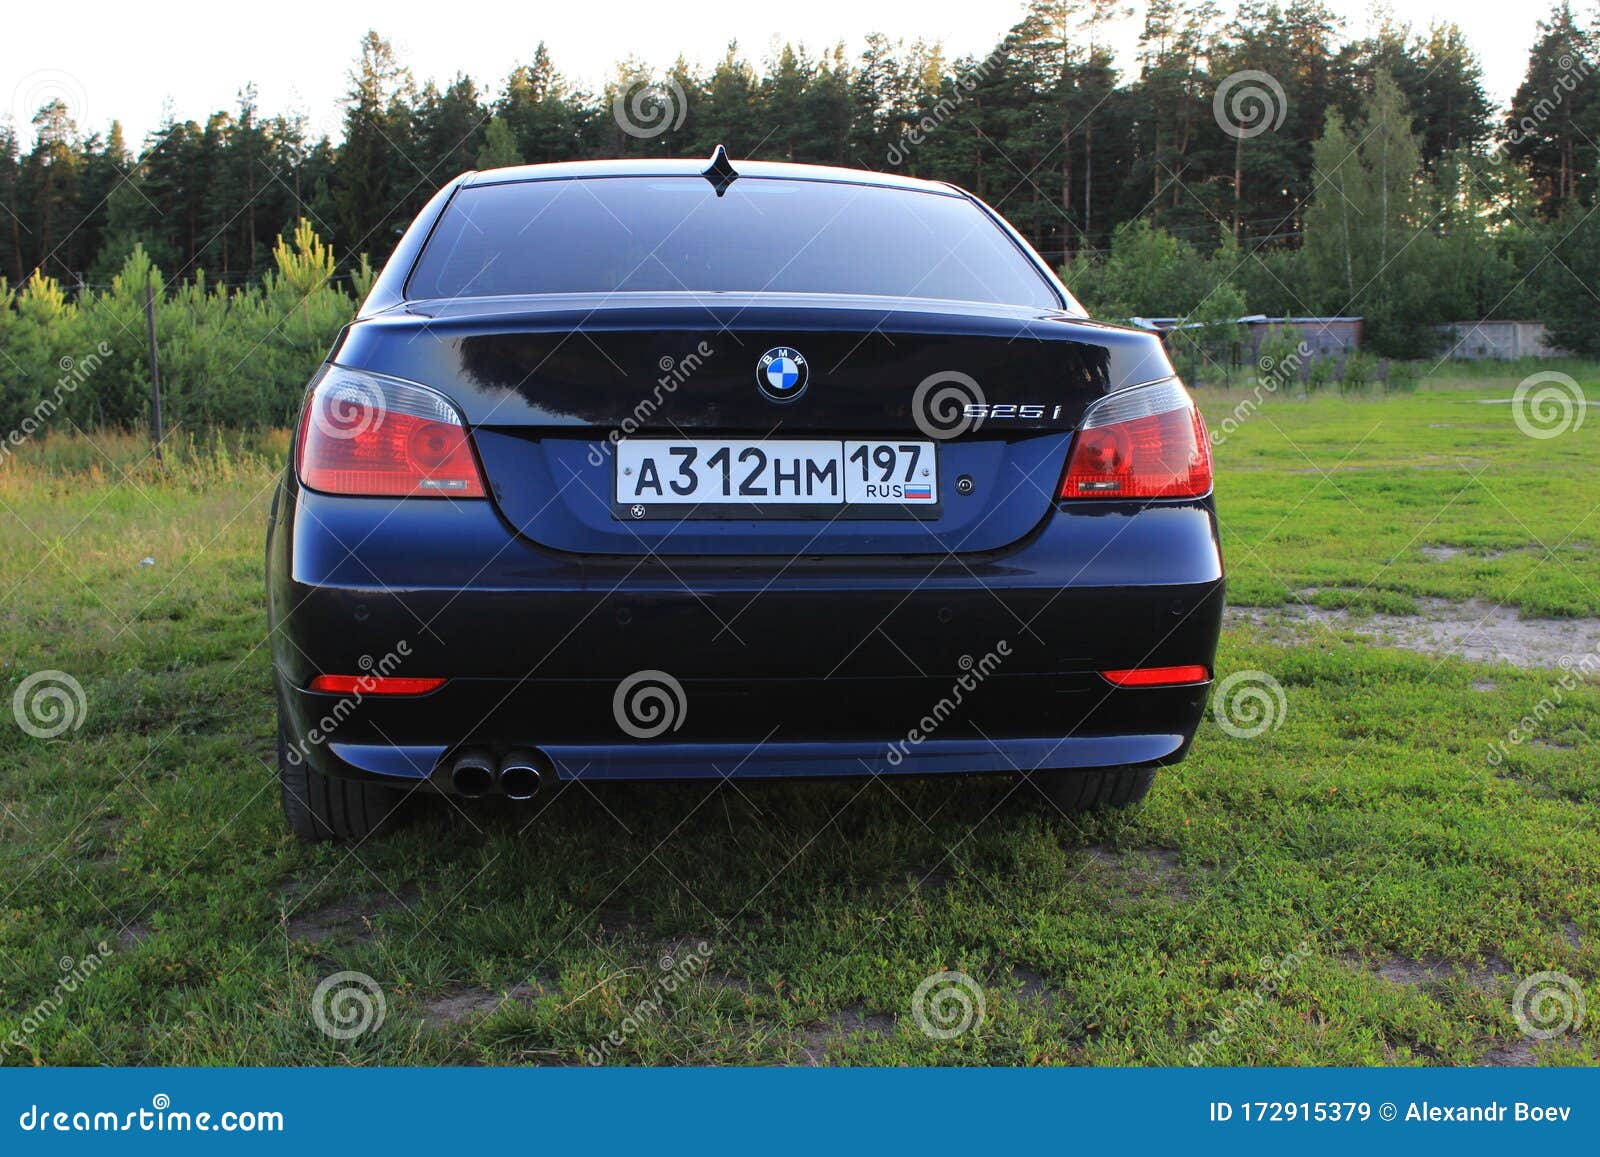 30+ Bmw E60 Stock Photos, Pictures & Royalty-Free Images - iStock